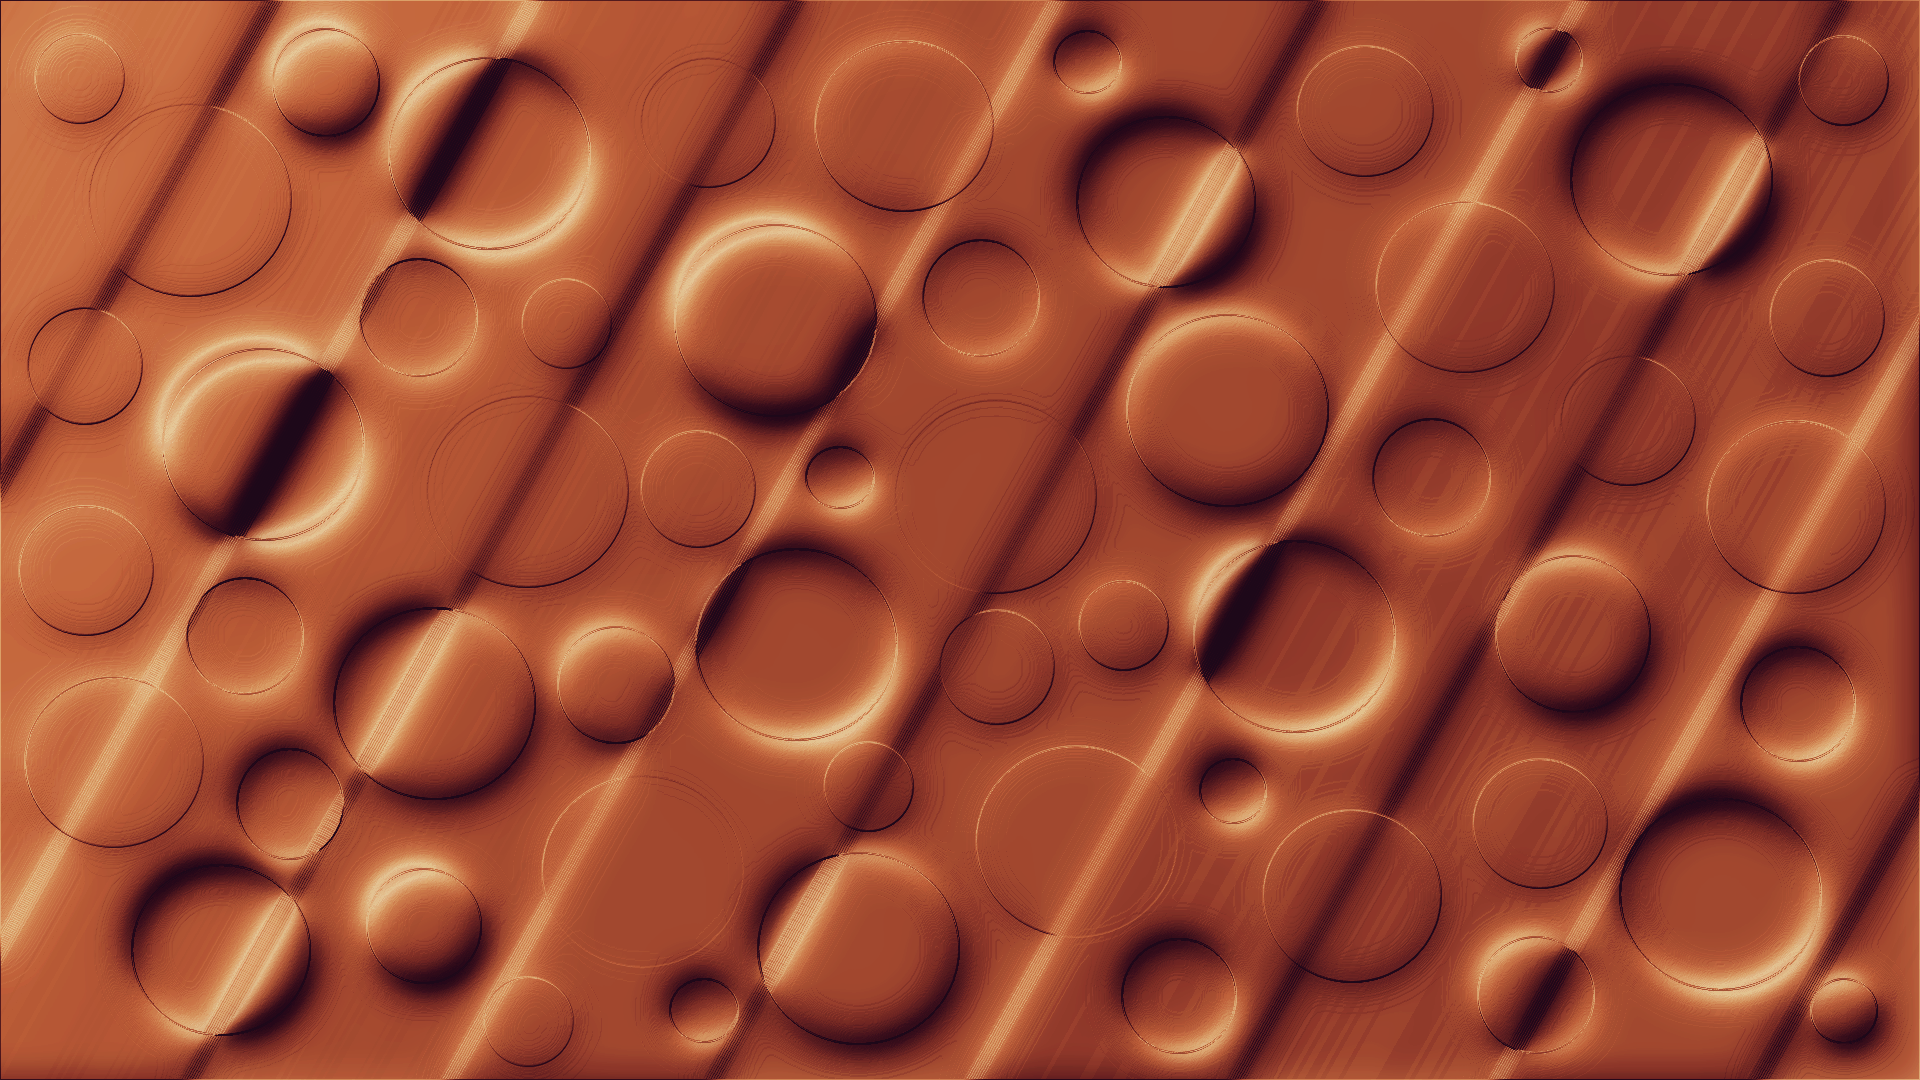 Brown Abstract 3D Circles by lonewolf6738 by lonewolf6738